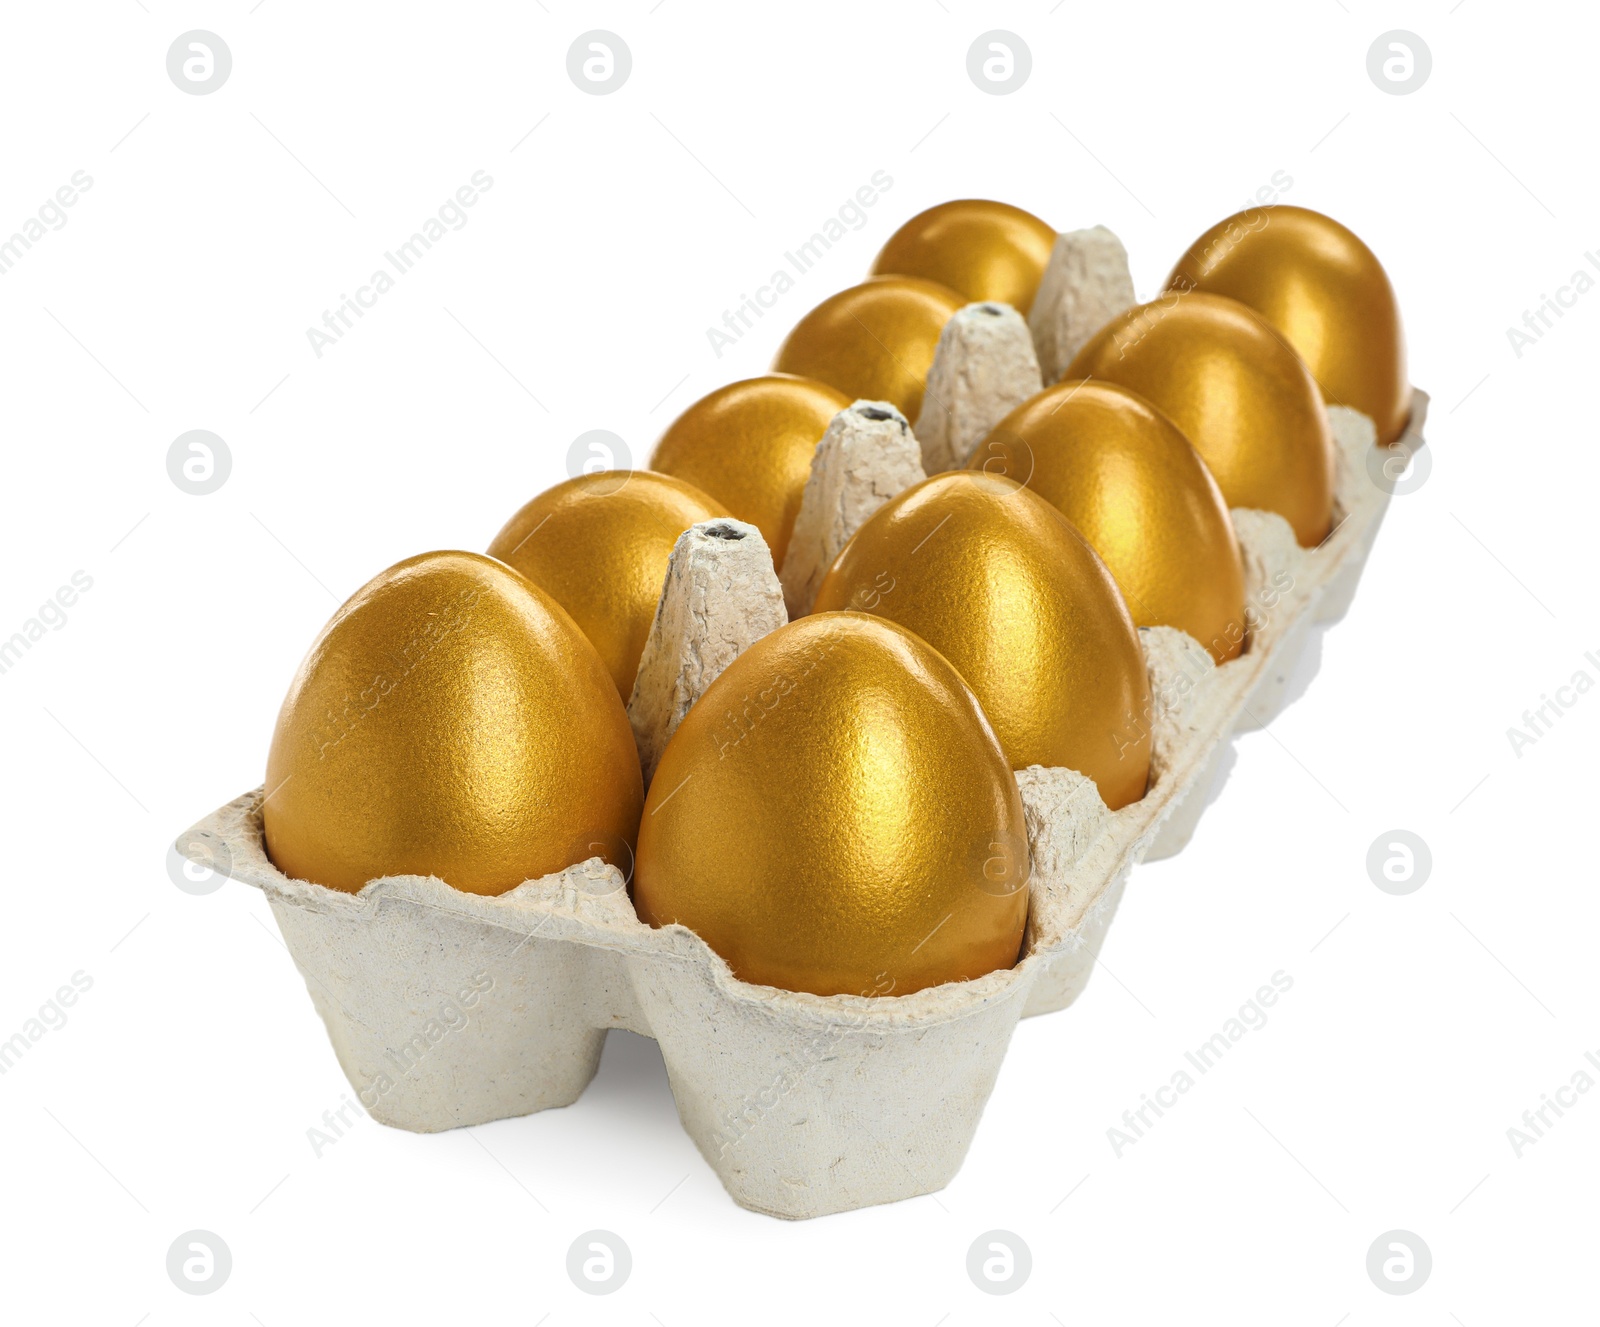 Photo of Many shiny golden eggs in carton on white background